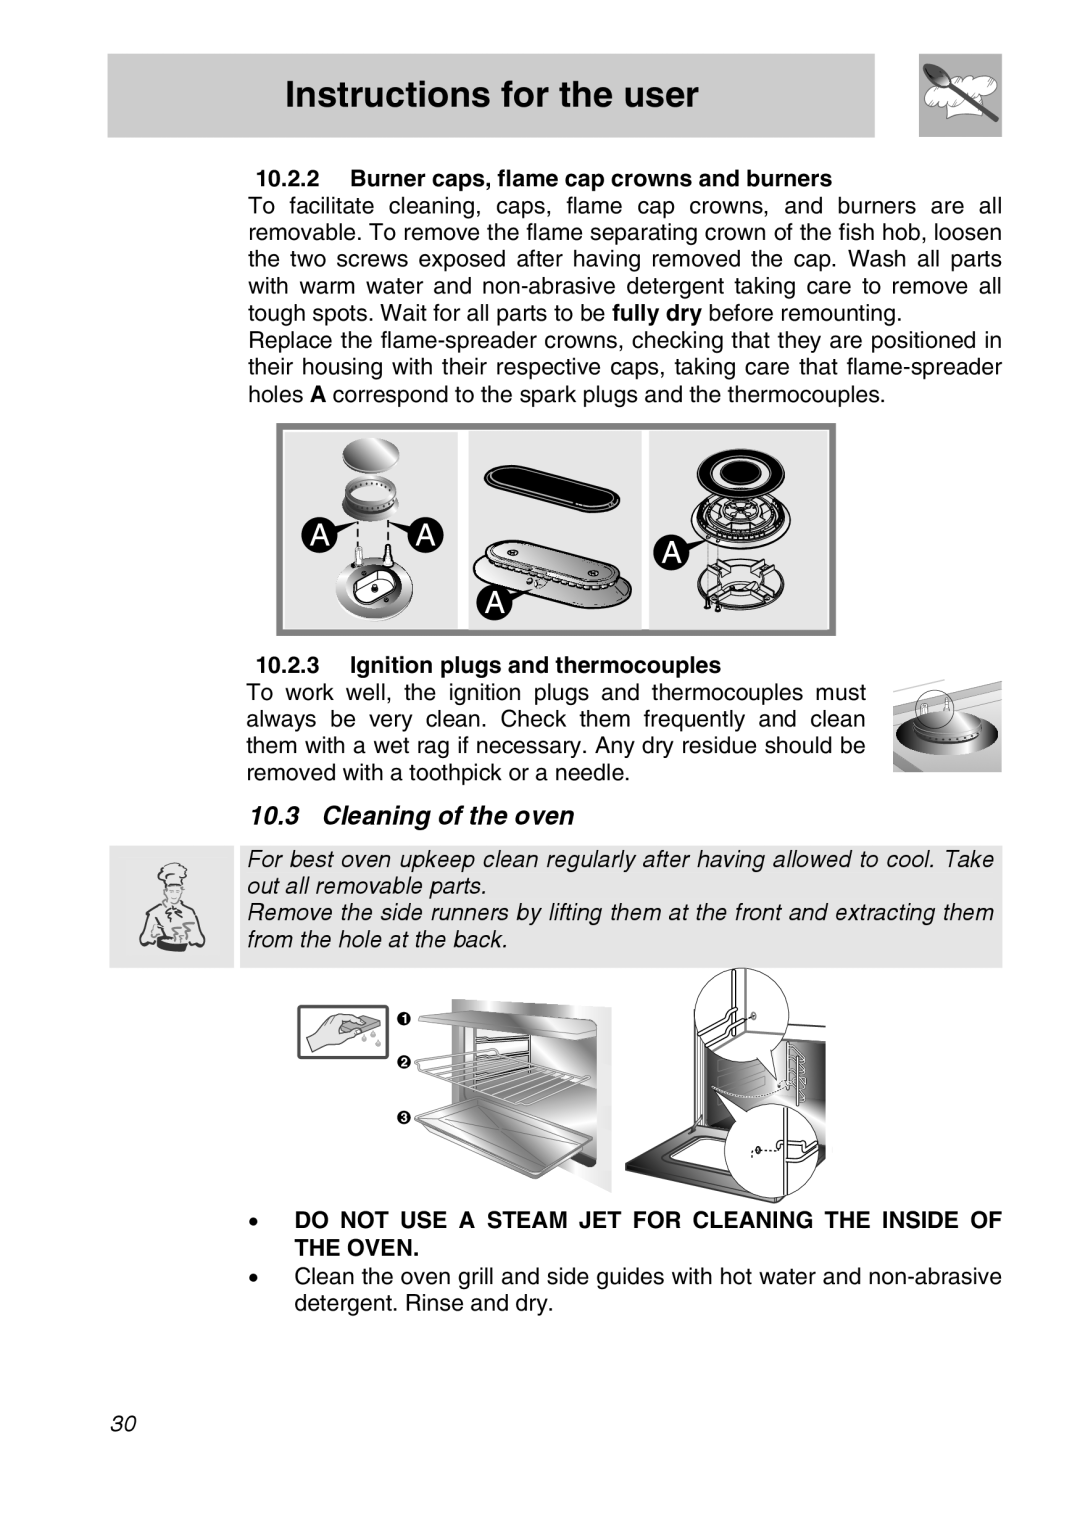 Smeg A11A-6 manual Instructions for the user, Cleaning of the oven, Burner caps, flame cap crowns and burners 